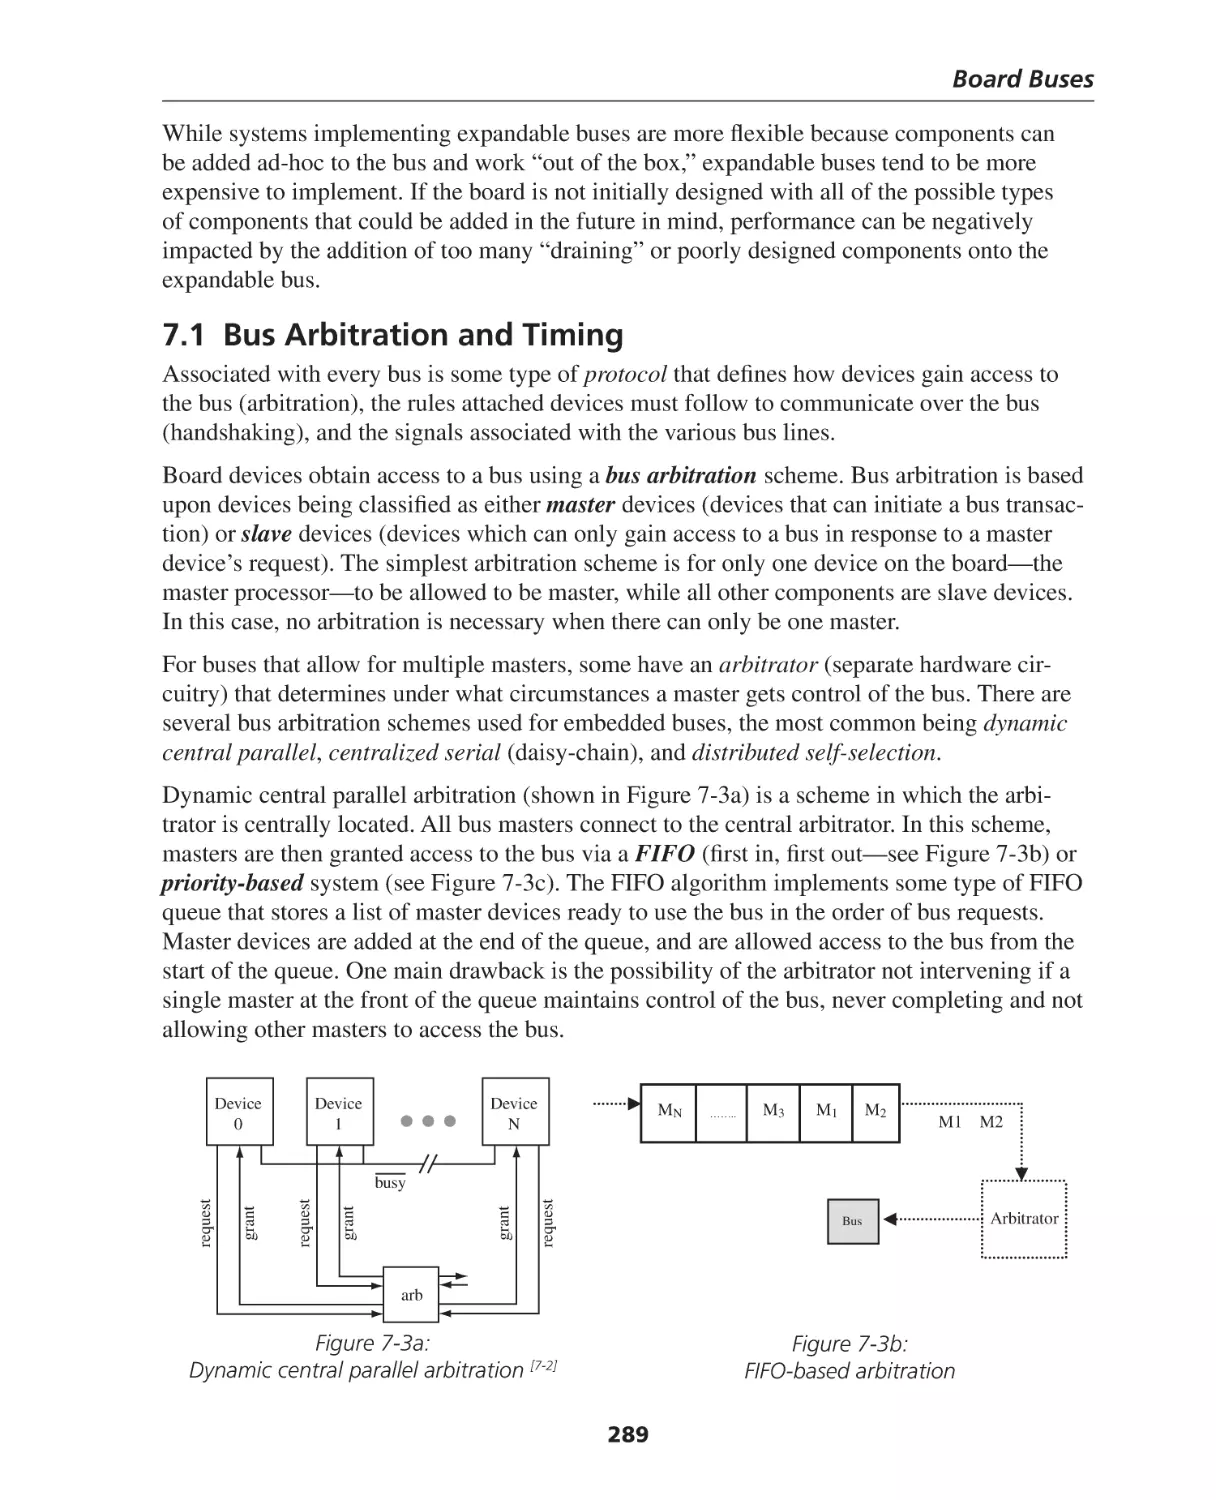 7.1 Bus Arbitration and Timing